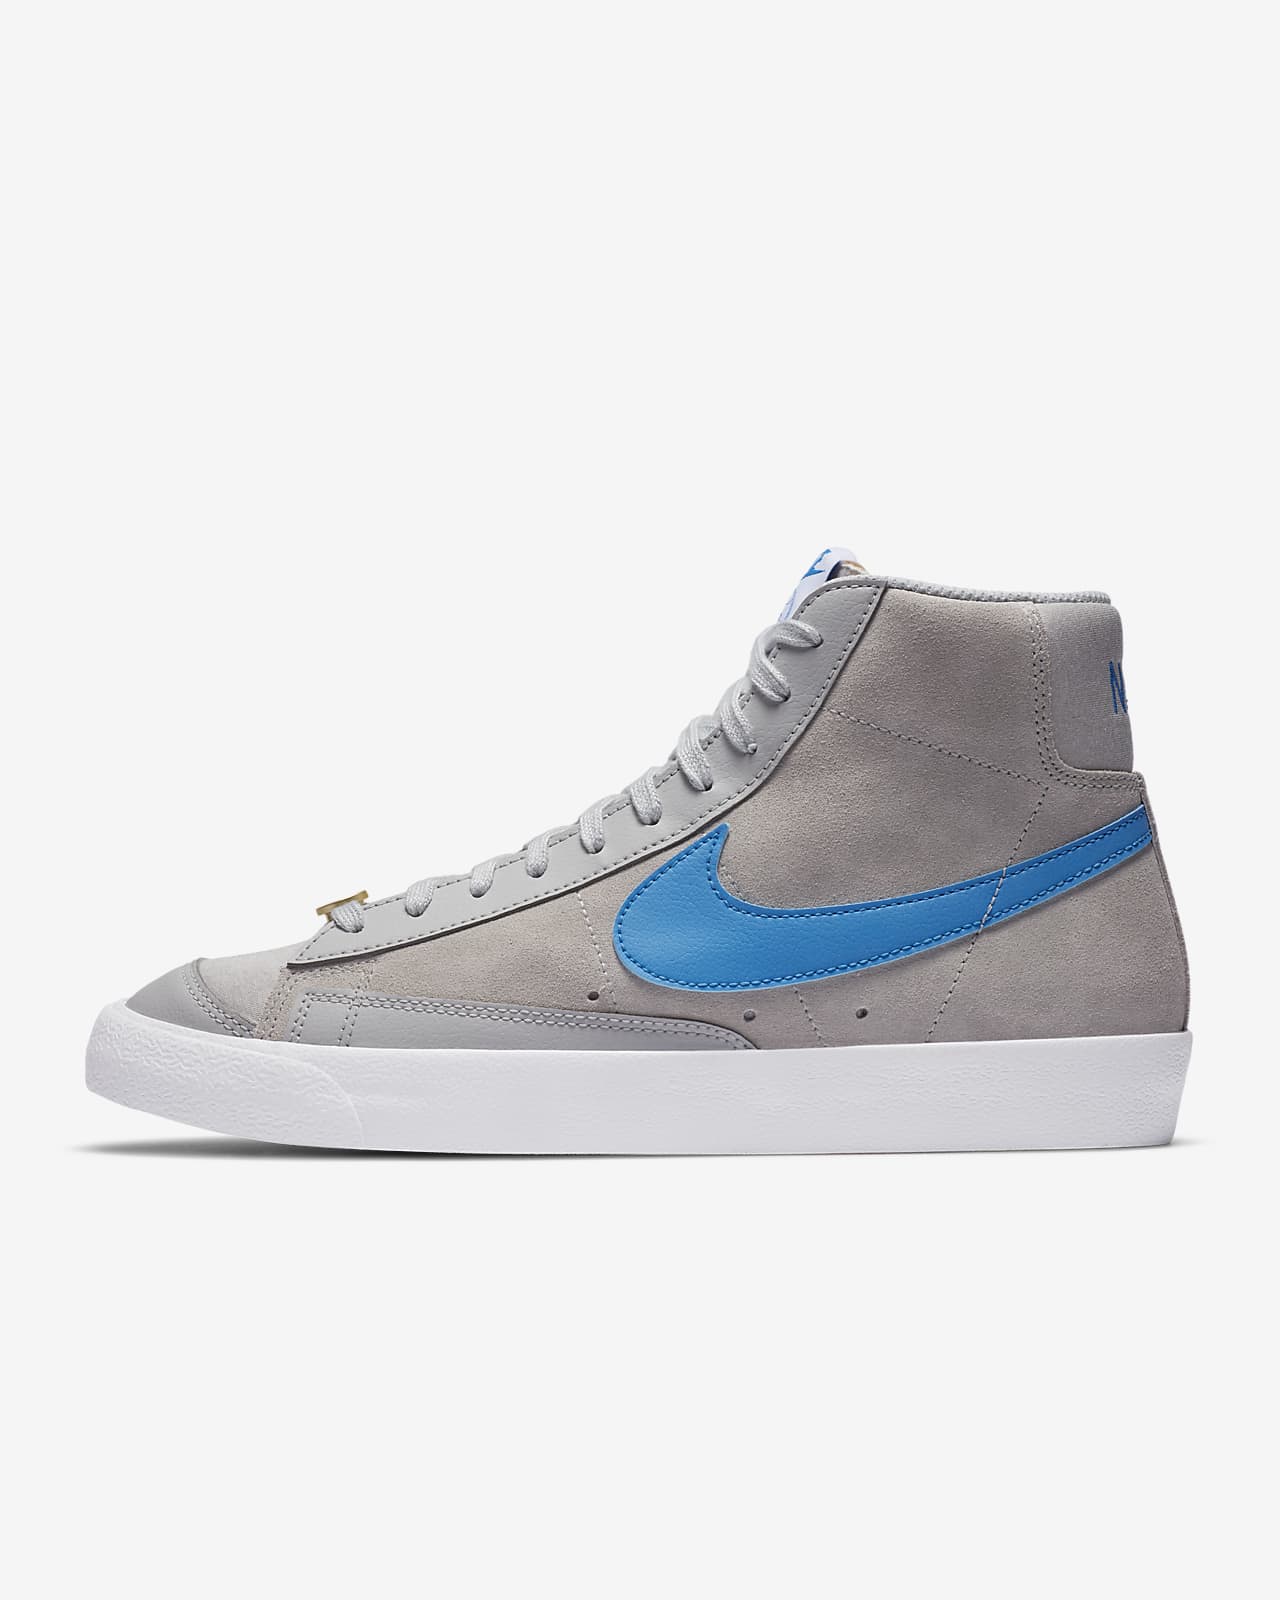 Nike Blazer Grey Suede Outlet Online, UP TO 53% OFF